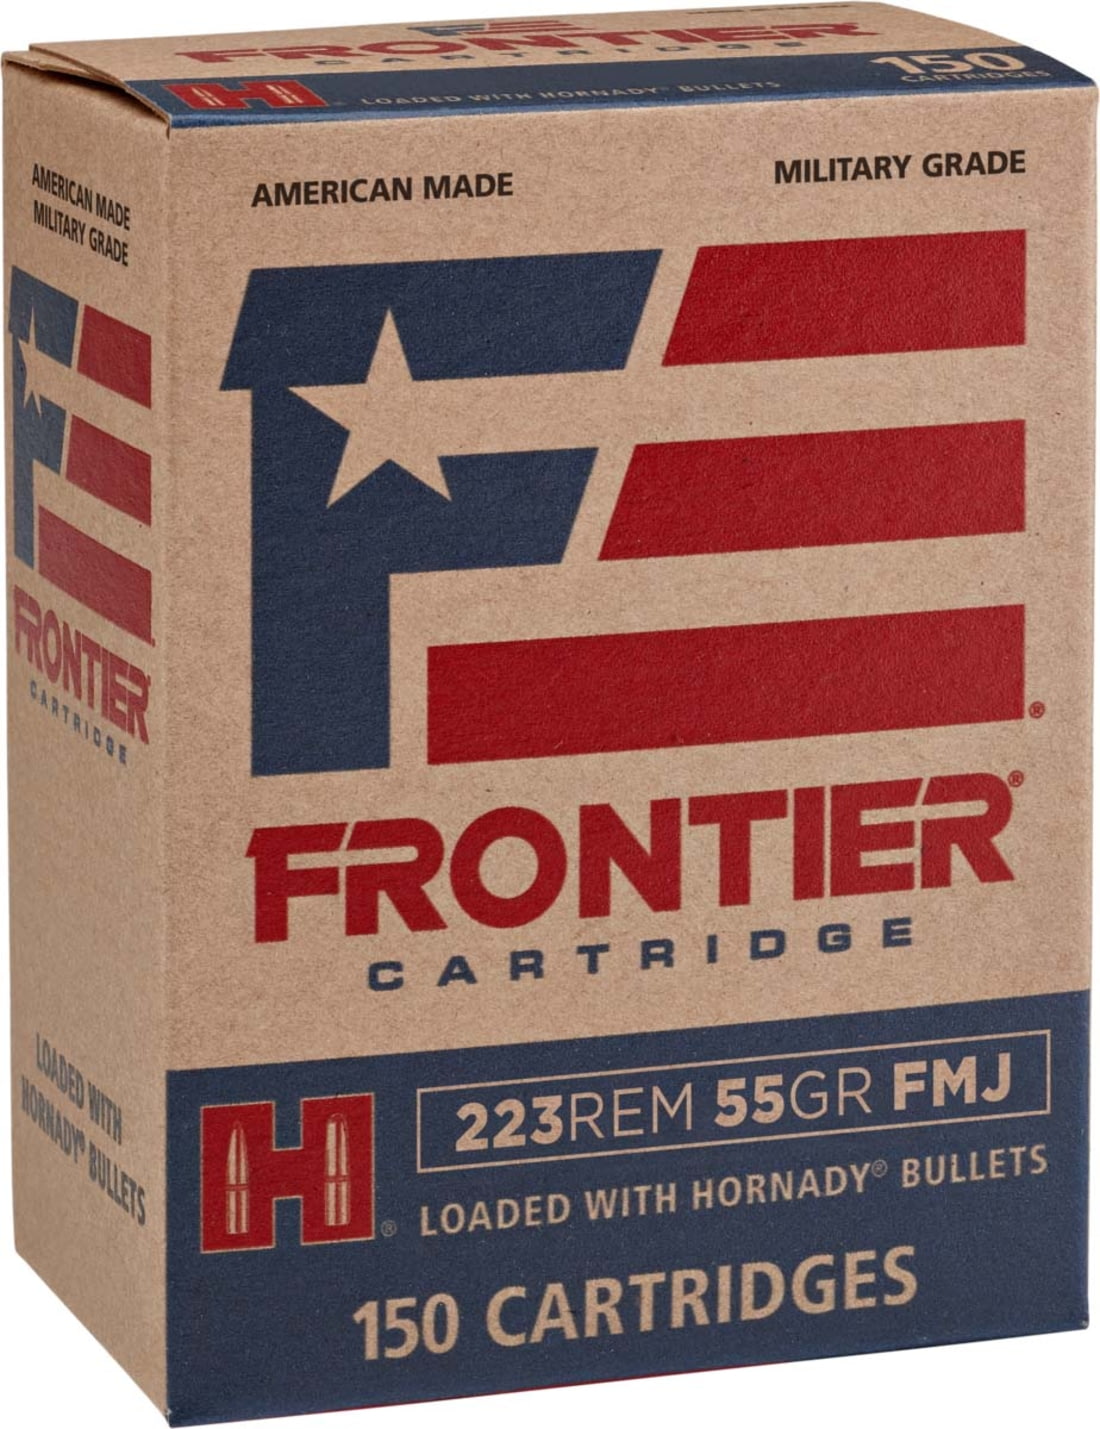 Hornady Frontier .223 Remington 55gr. FMJ Rifle Ammo - 150 Rounds